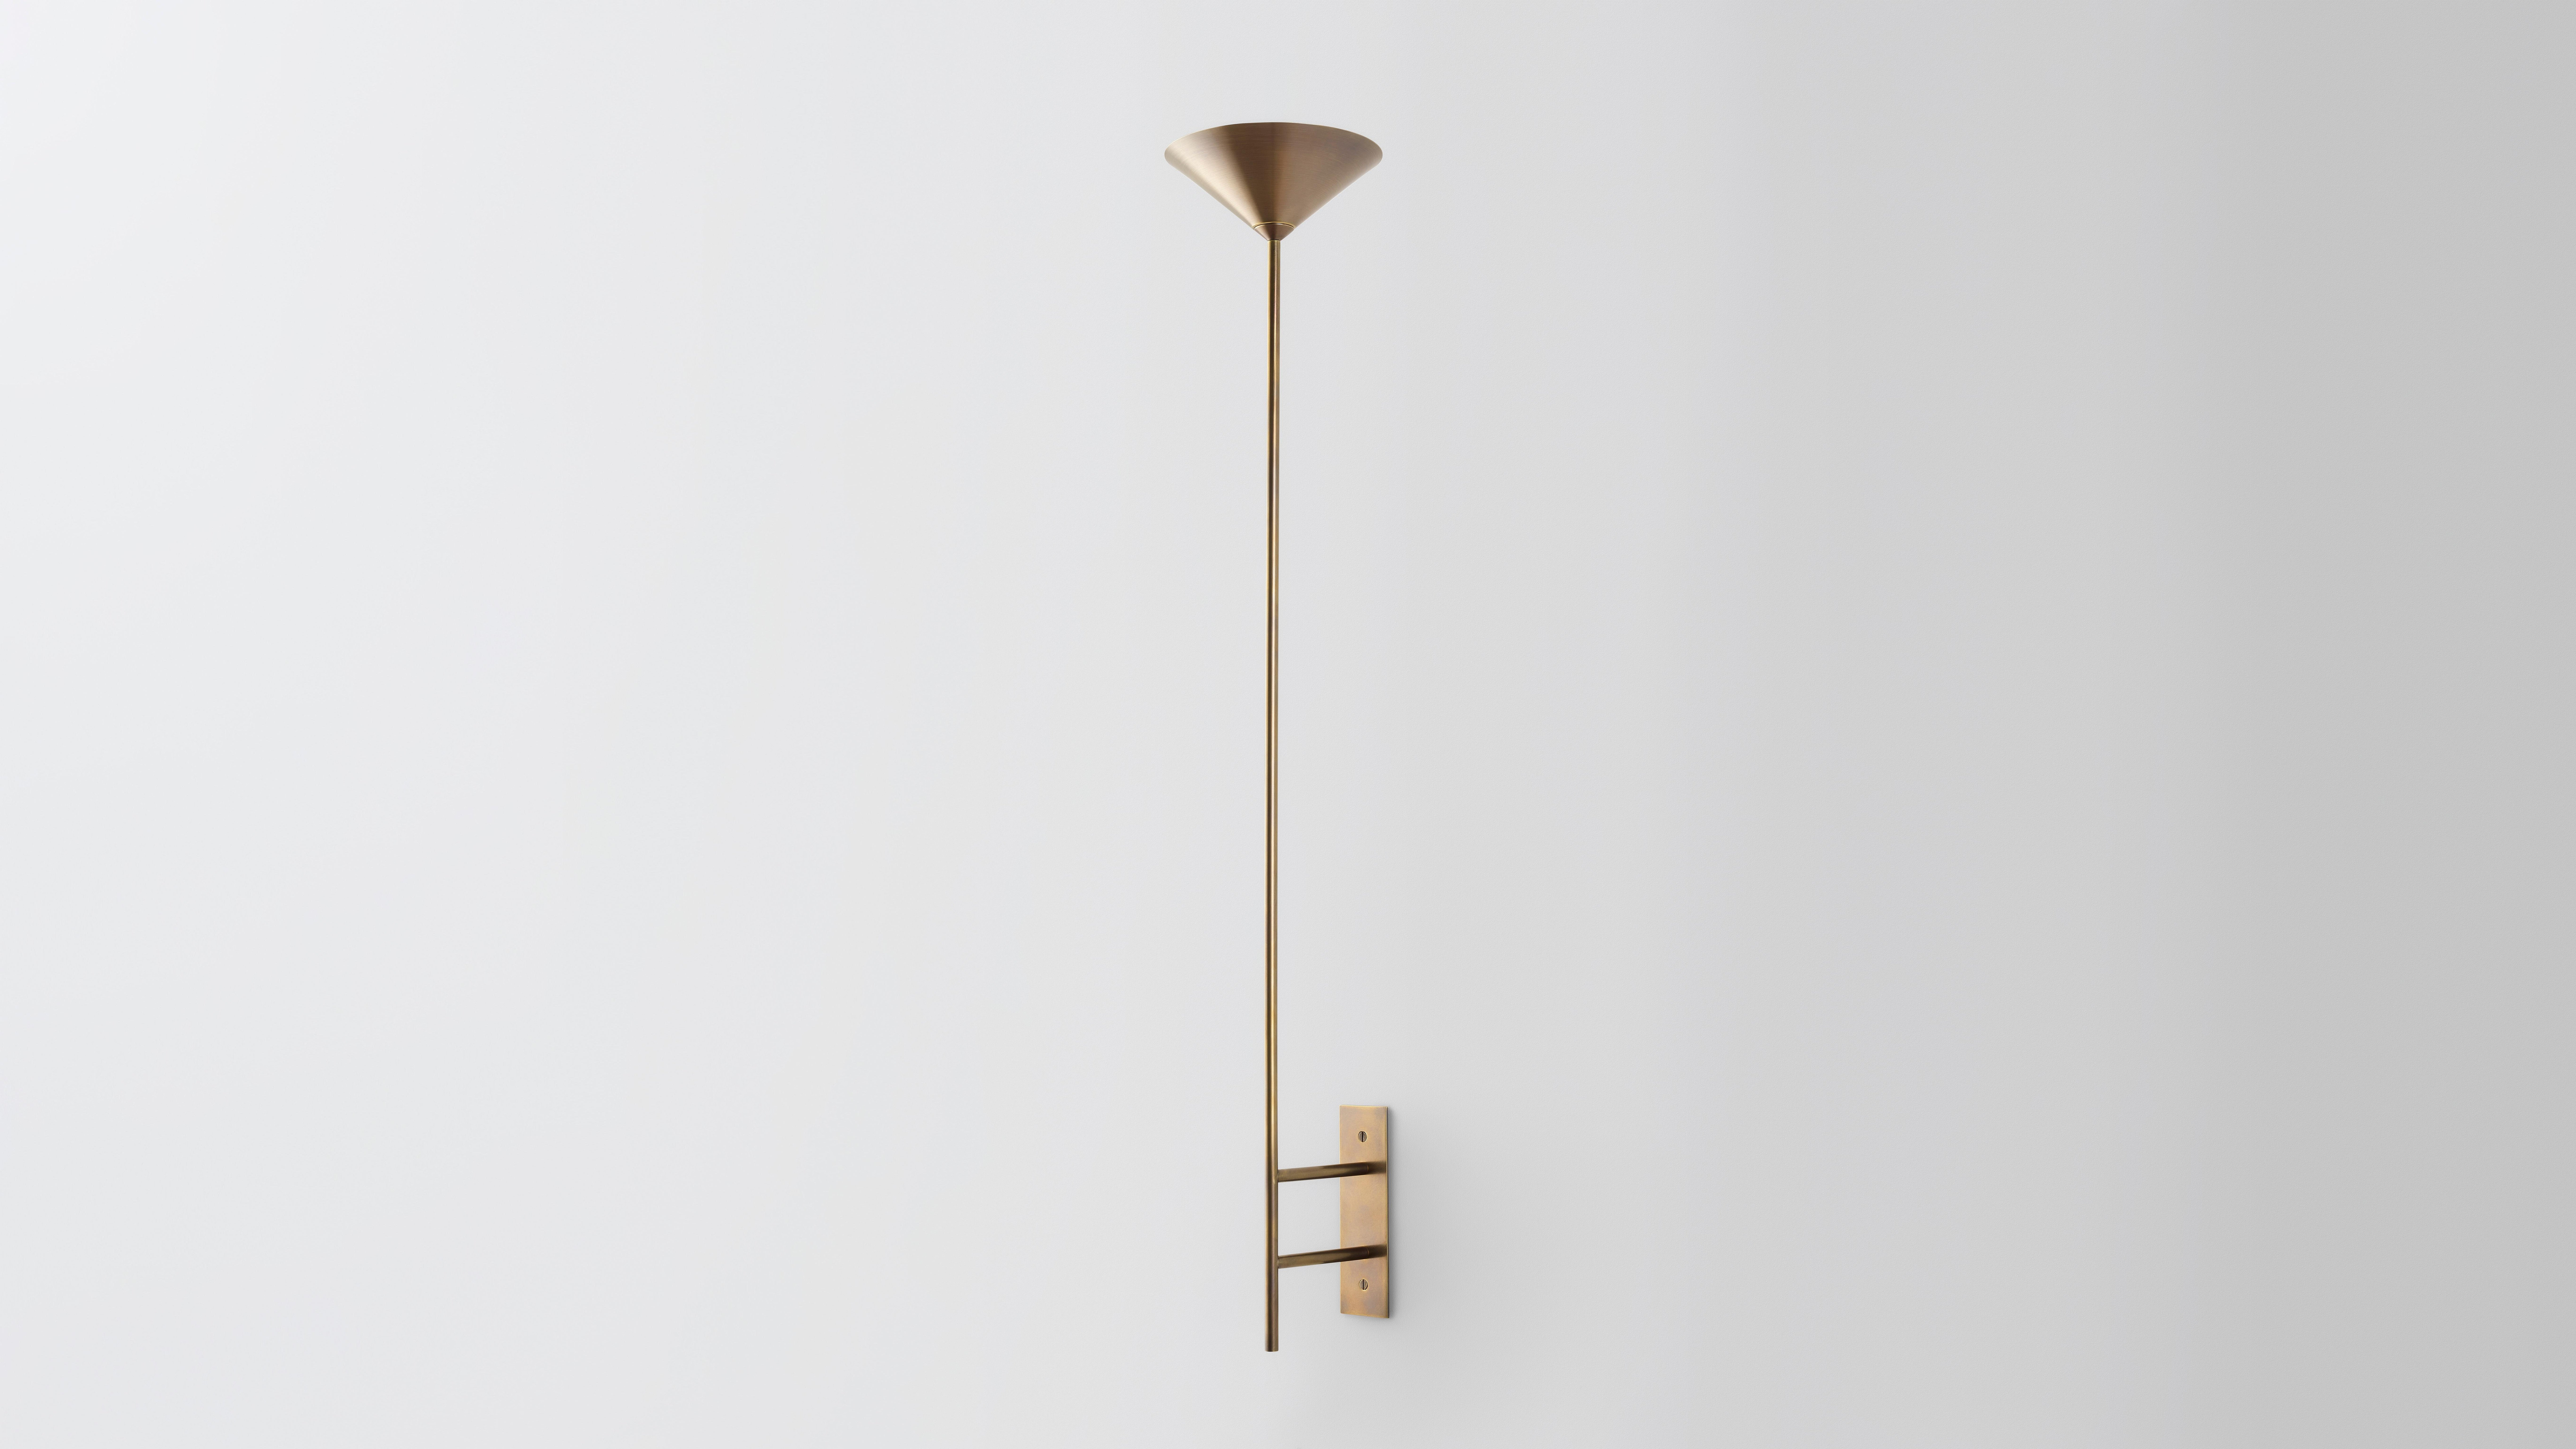 Wall stack up by Volker Haug 
Pyramid Scheme series
Dimensions : W 21 D 21 H 40 cm
Support: 20 cm 
Suspension: Minimum 40 cm
Material: Brass
Finishes : Polished, Brushed or Bronzed Brass; Enamel or Chrome Plated. 
Custom finishes available on